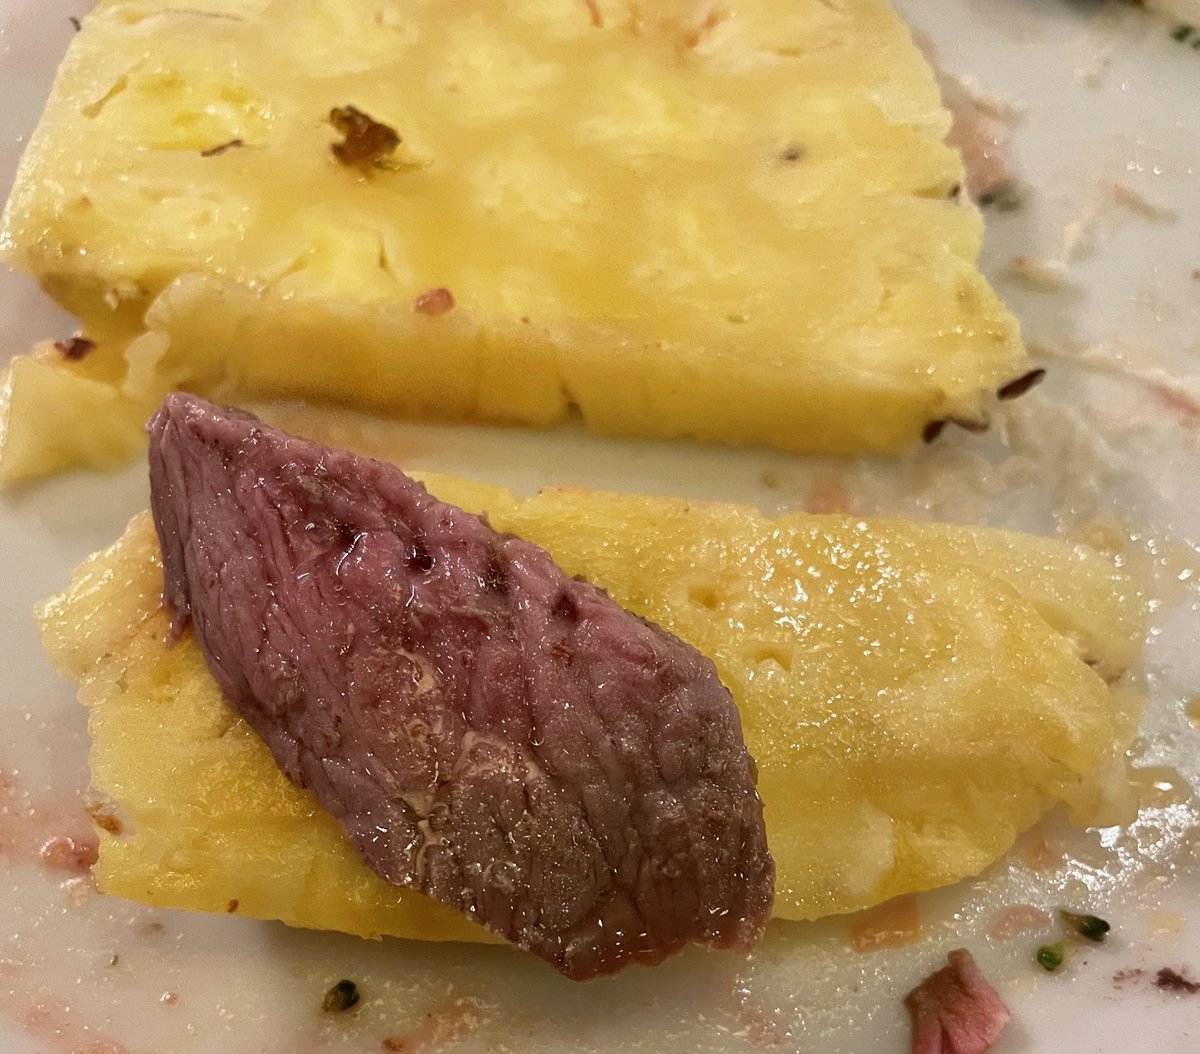 Beef and pineapple. 
Ultimate combination.